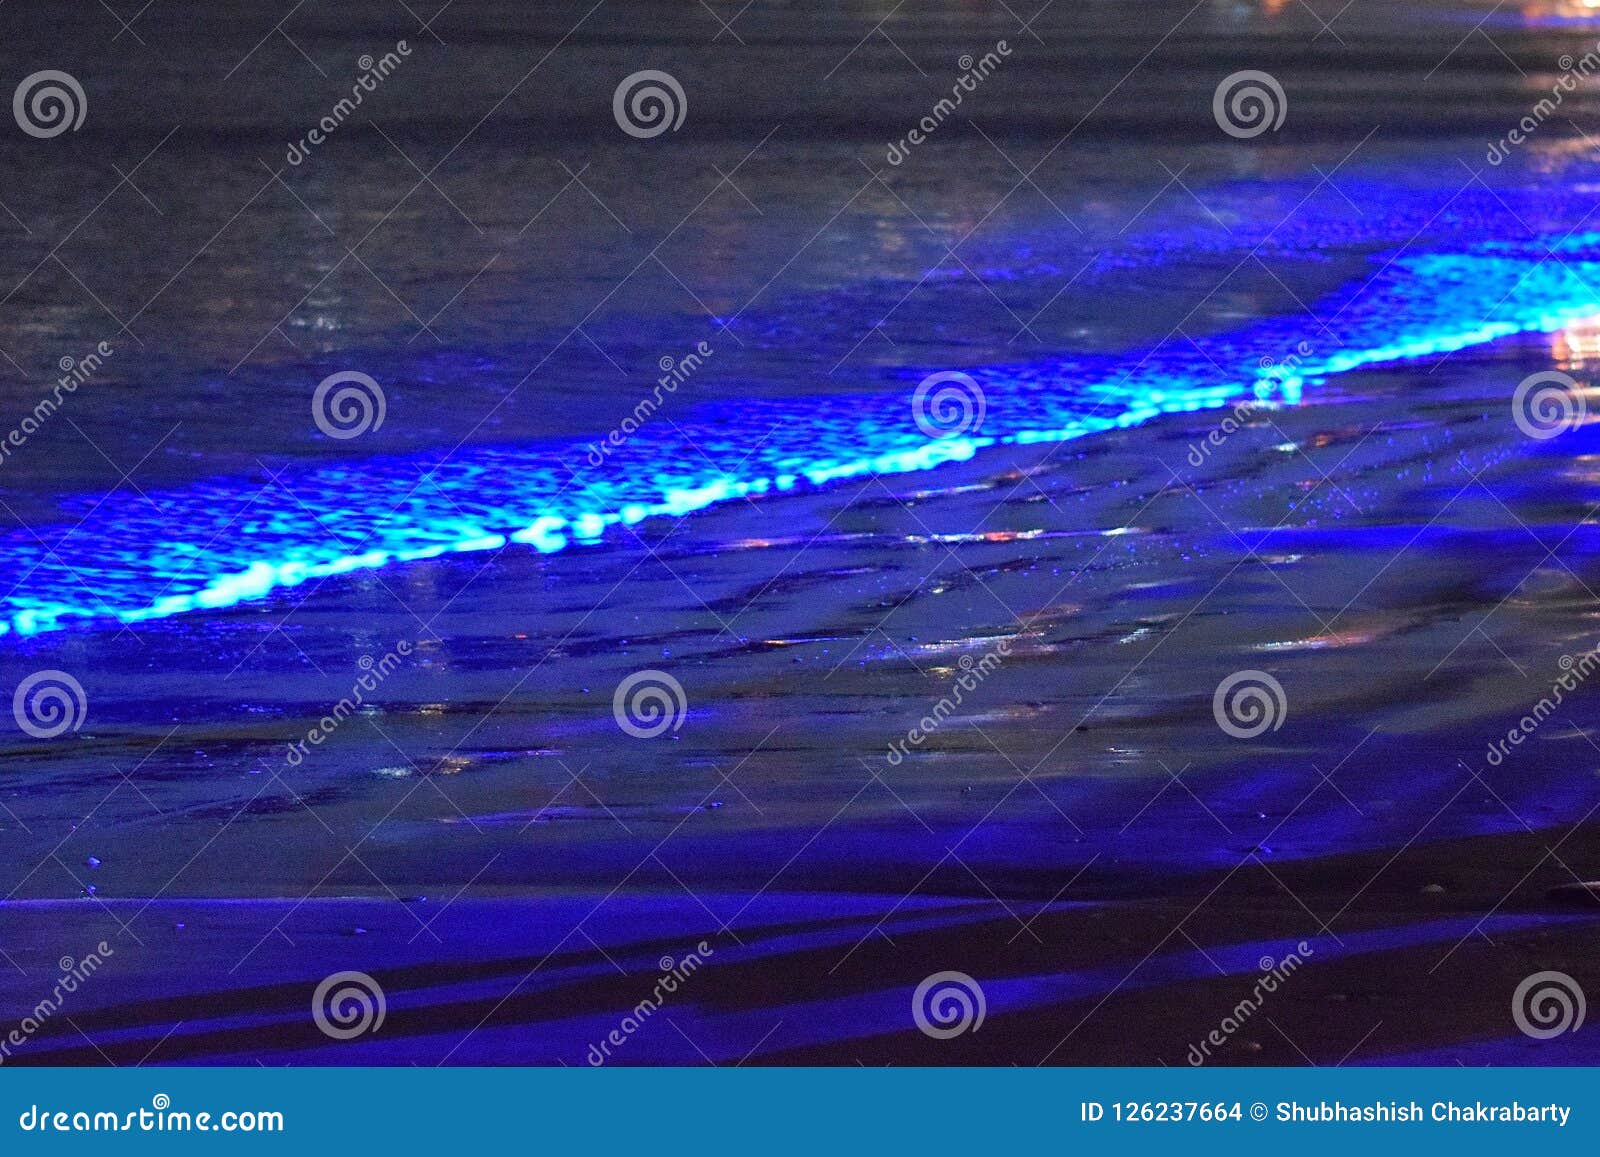 electric blue glow on pacific coast waves or red tide